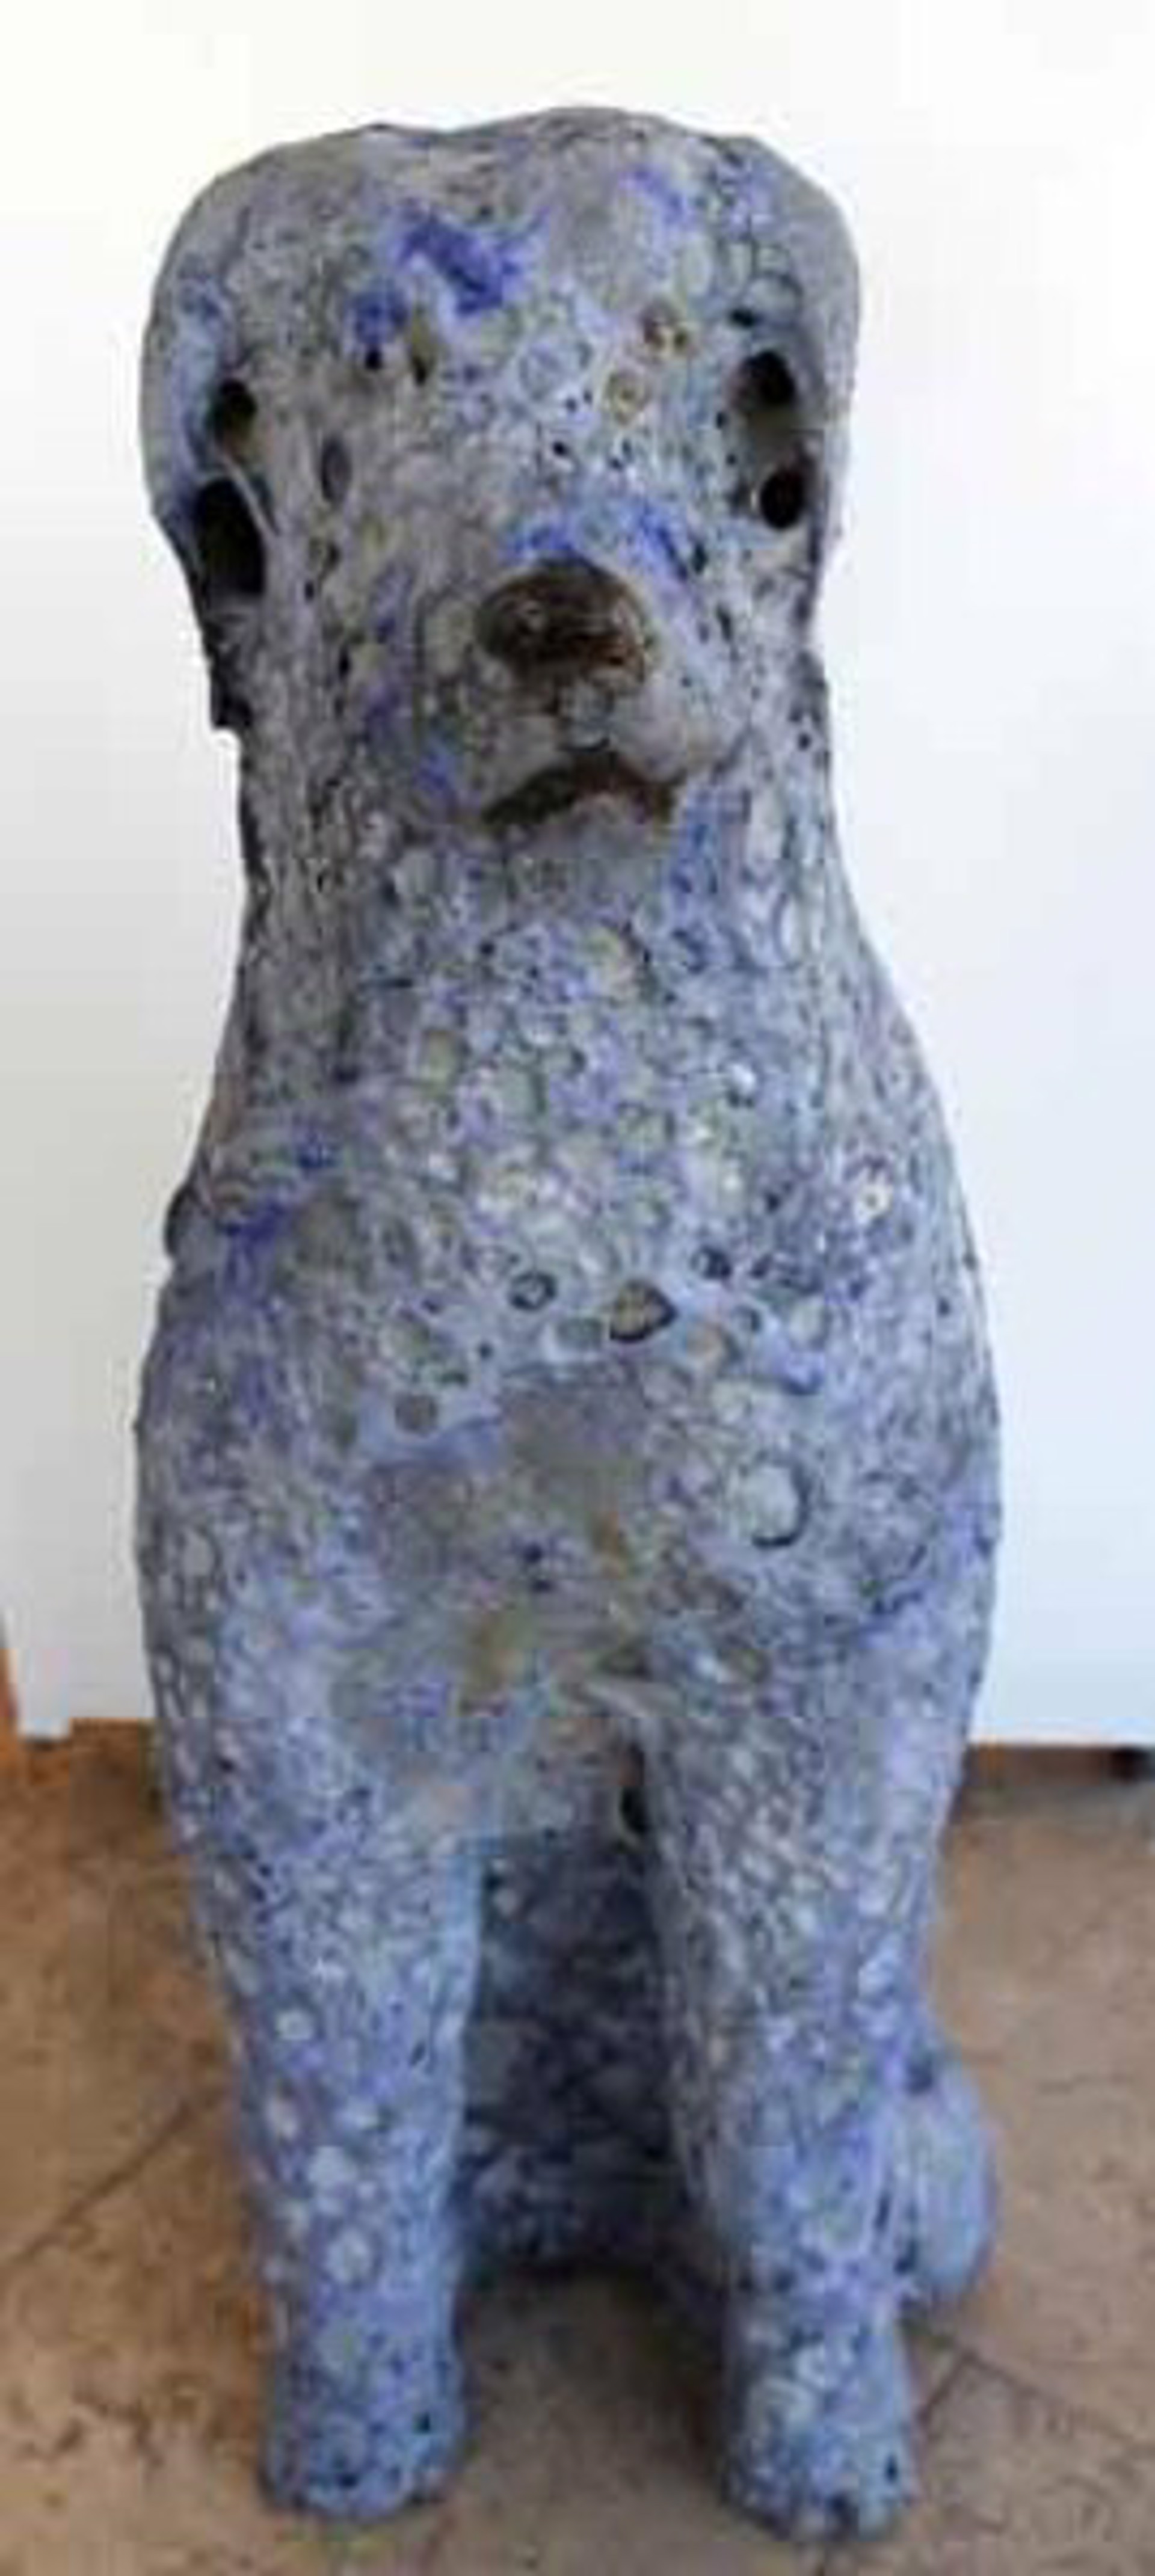 Blue Dog by Mark Chatterley